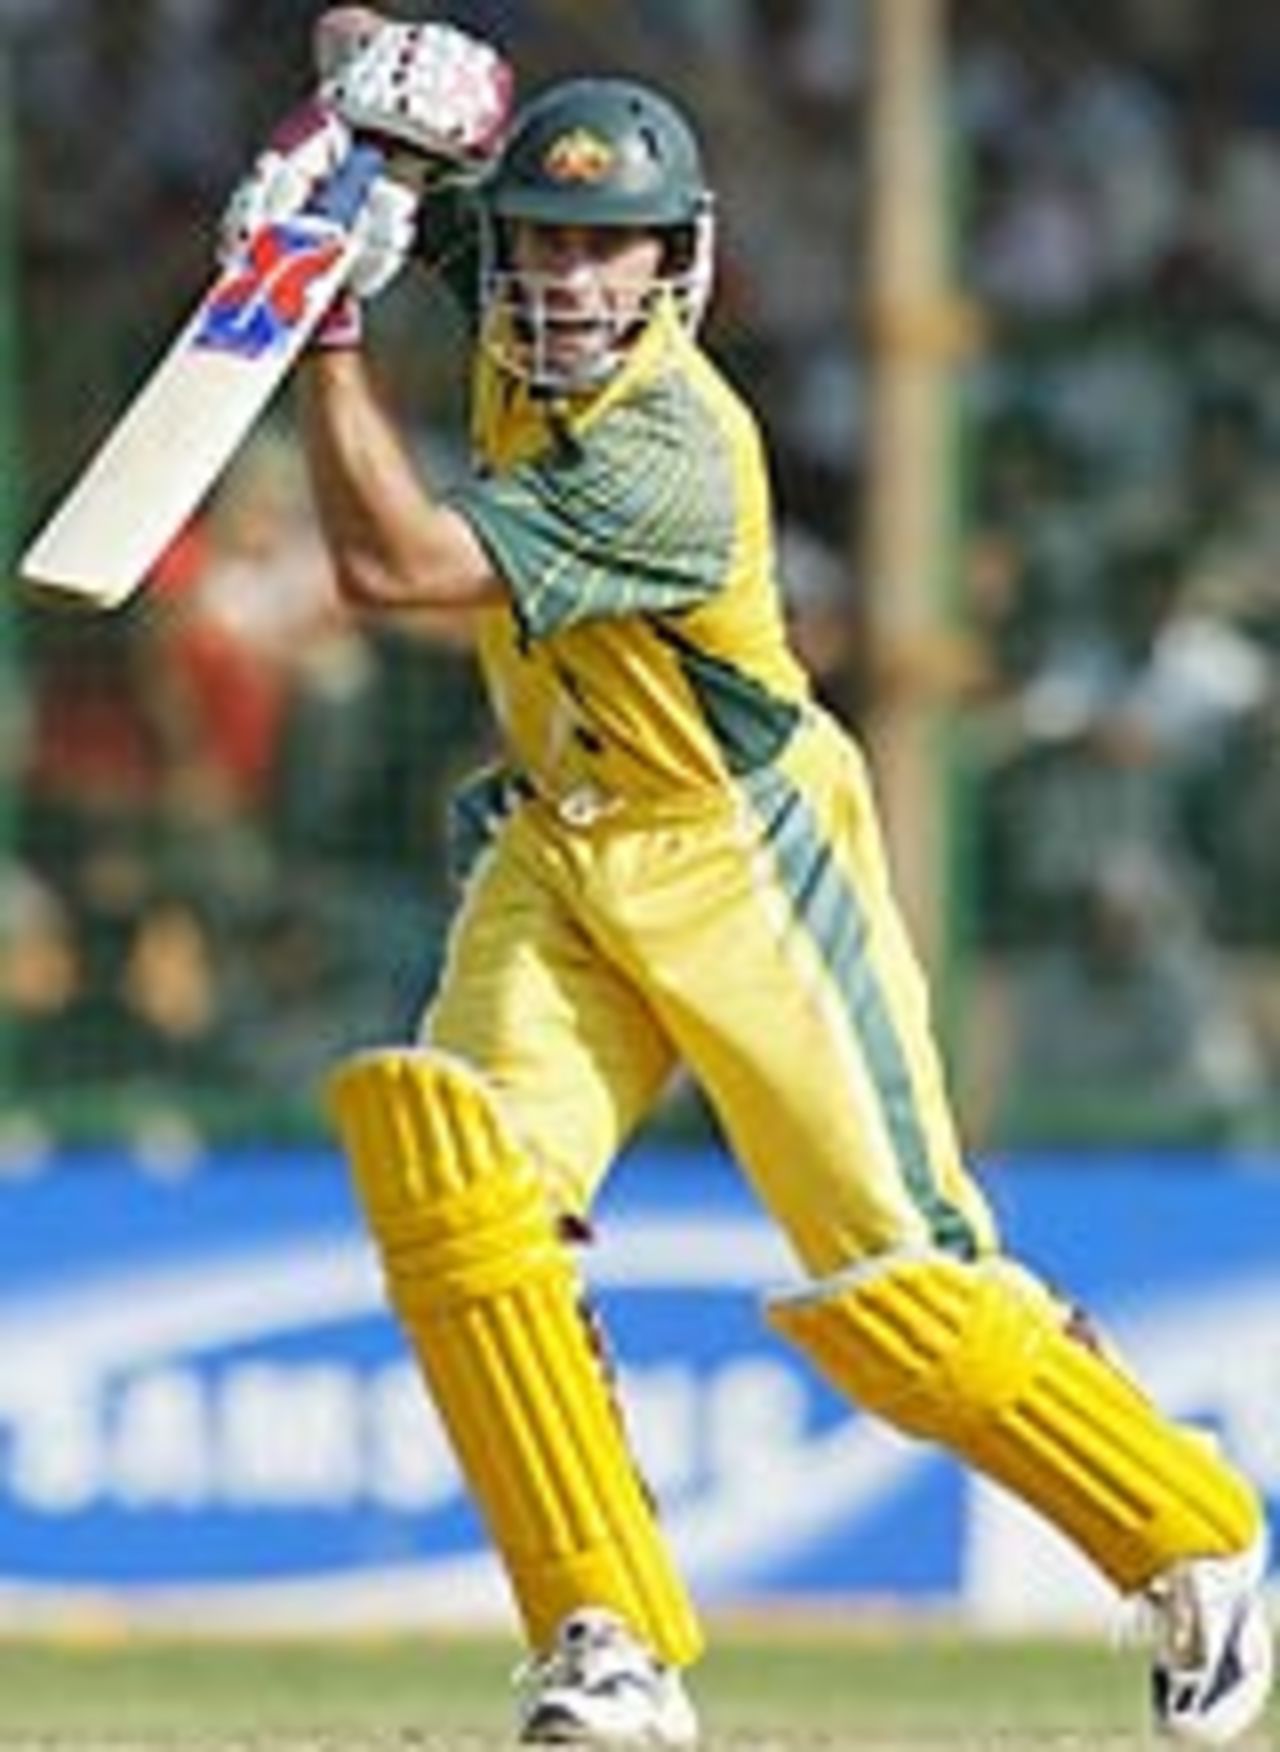 Michael Bevan strokes his way to a fluent 50, Australia v New Zealand, 5th ODI, TVS Cup, Pune, 3rd November, 2003